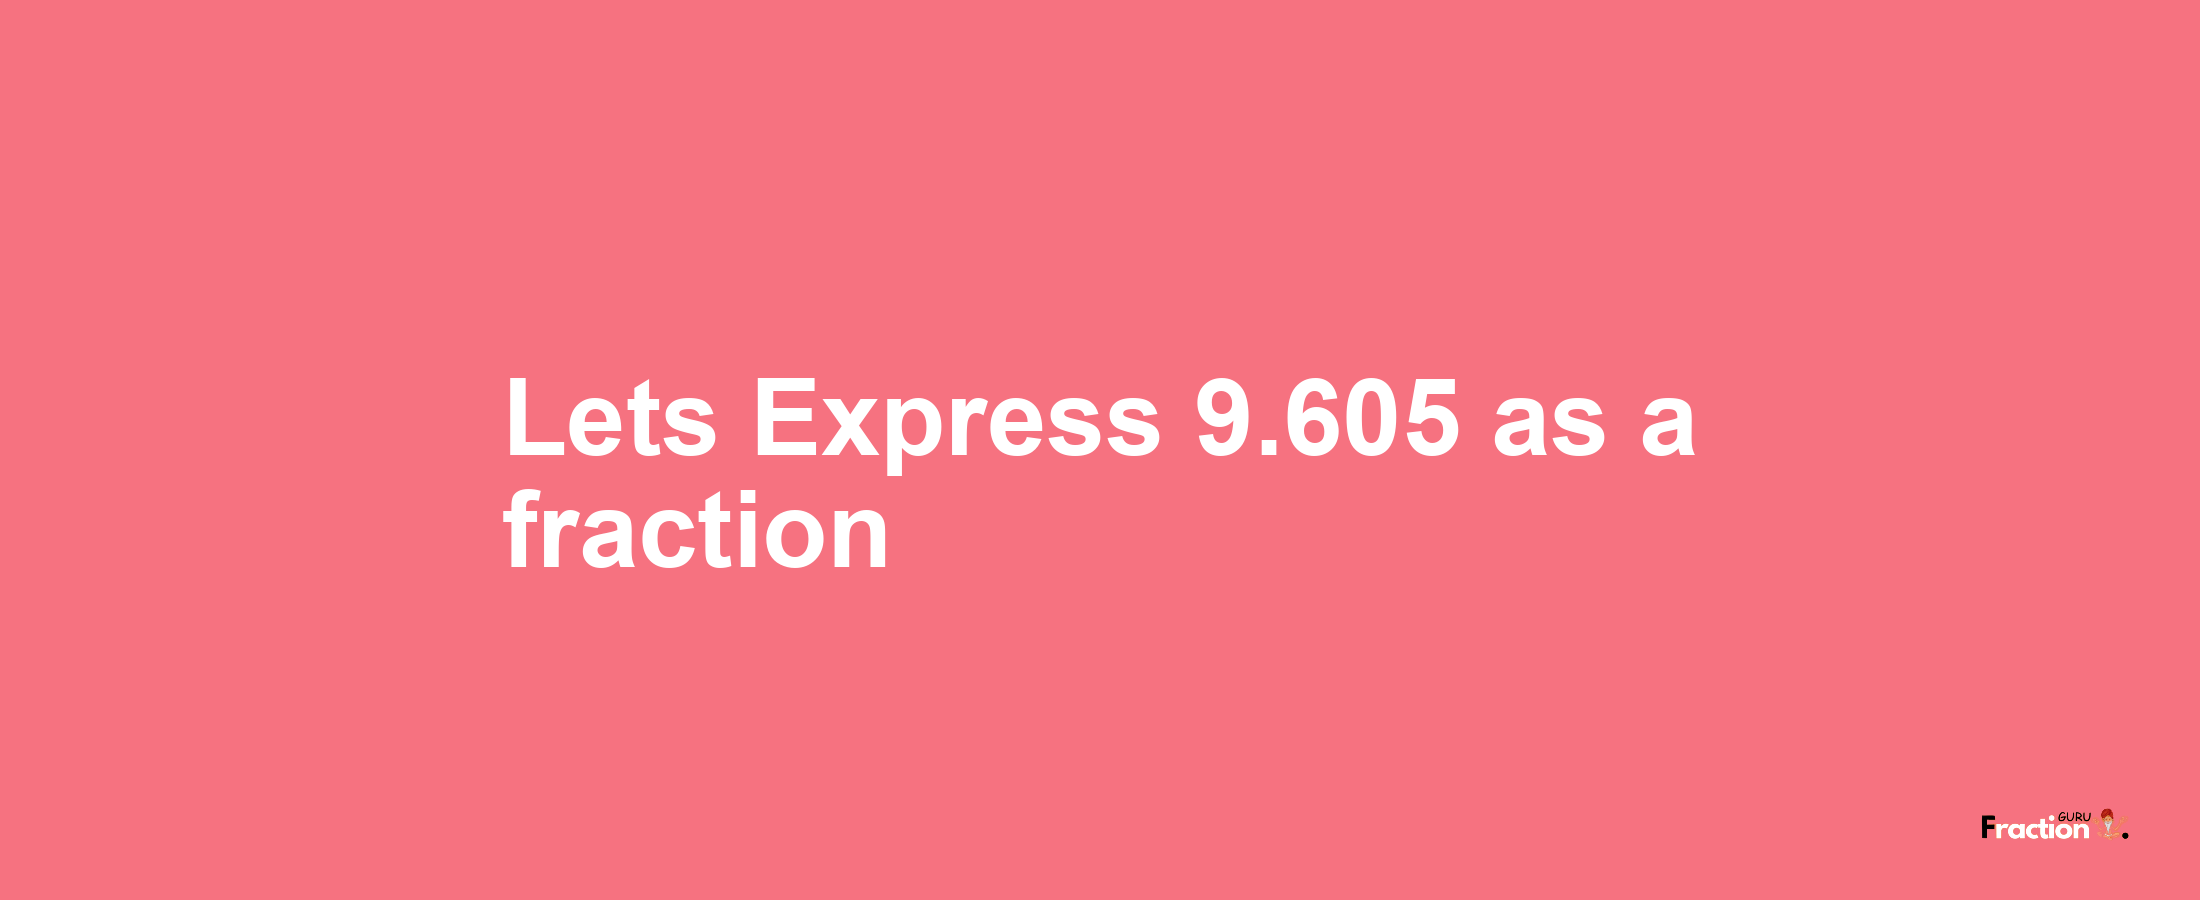 Lets Express 9.605 as afraction